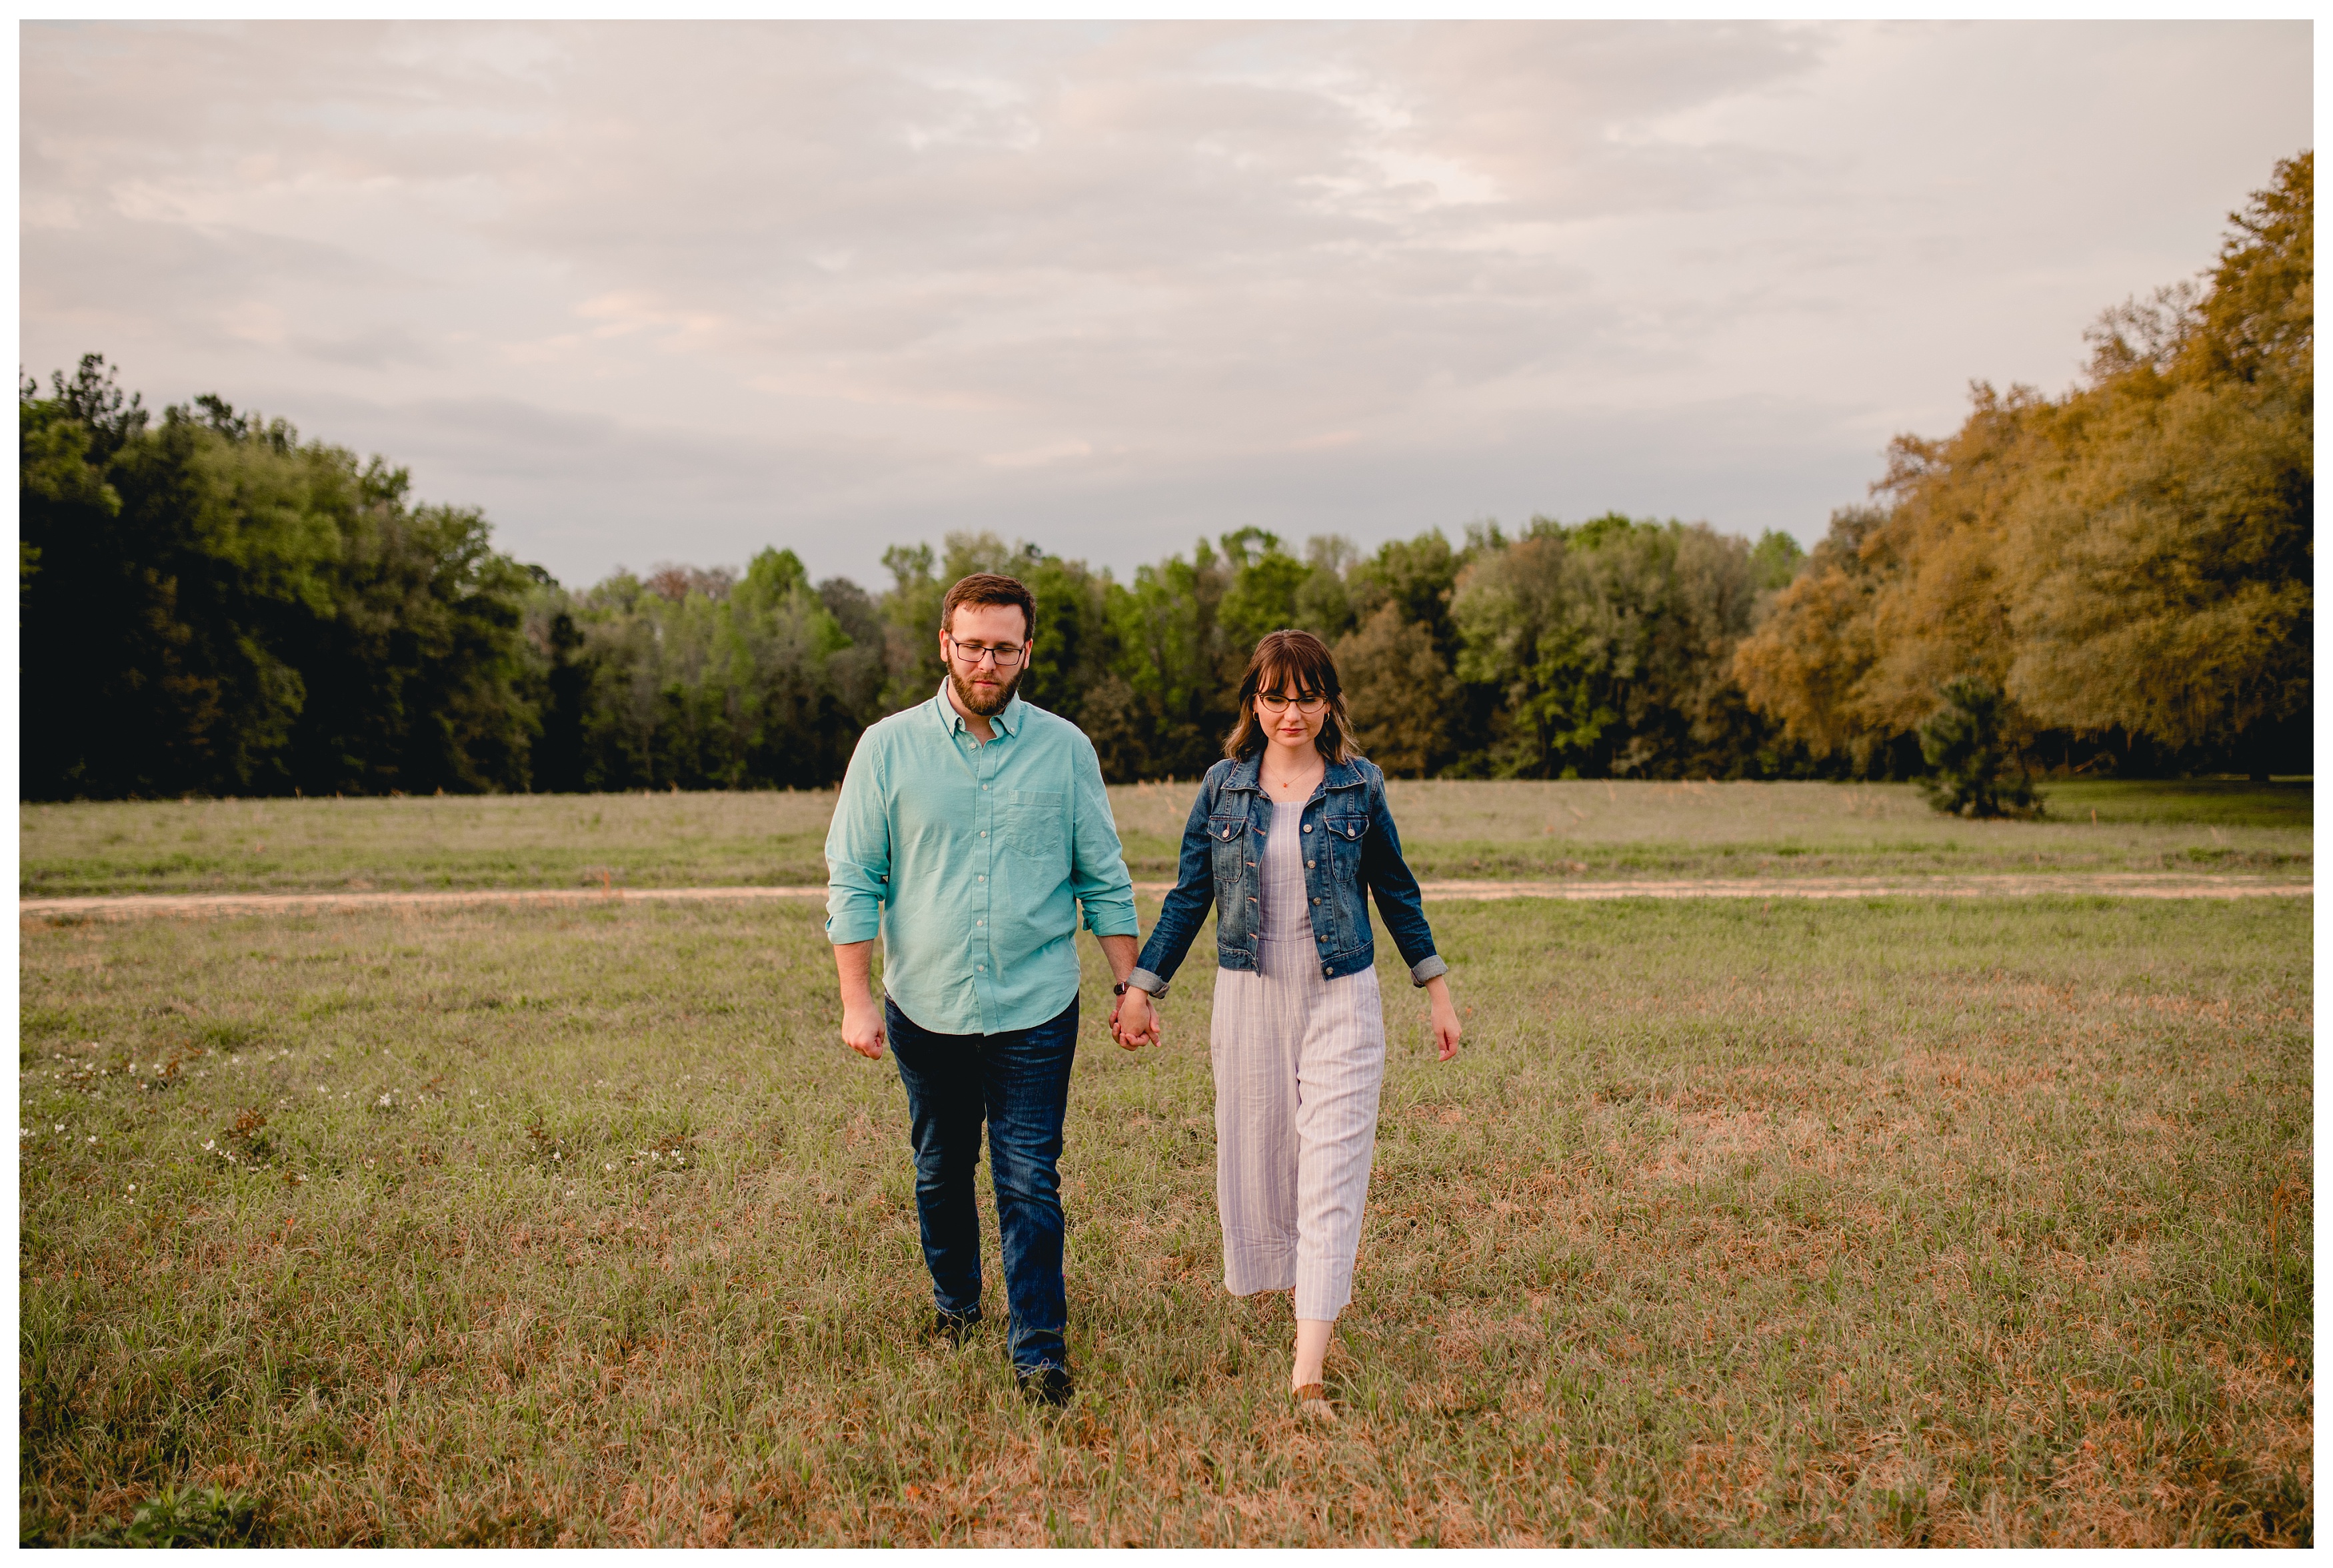 Simple, but effective engagement photo on a family farm in north florida. Shelly Williams Photography